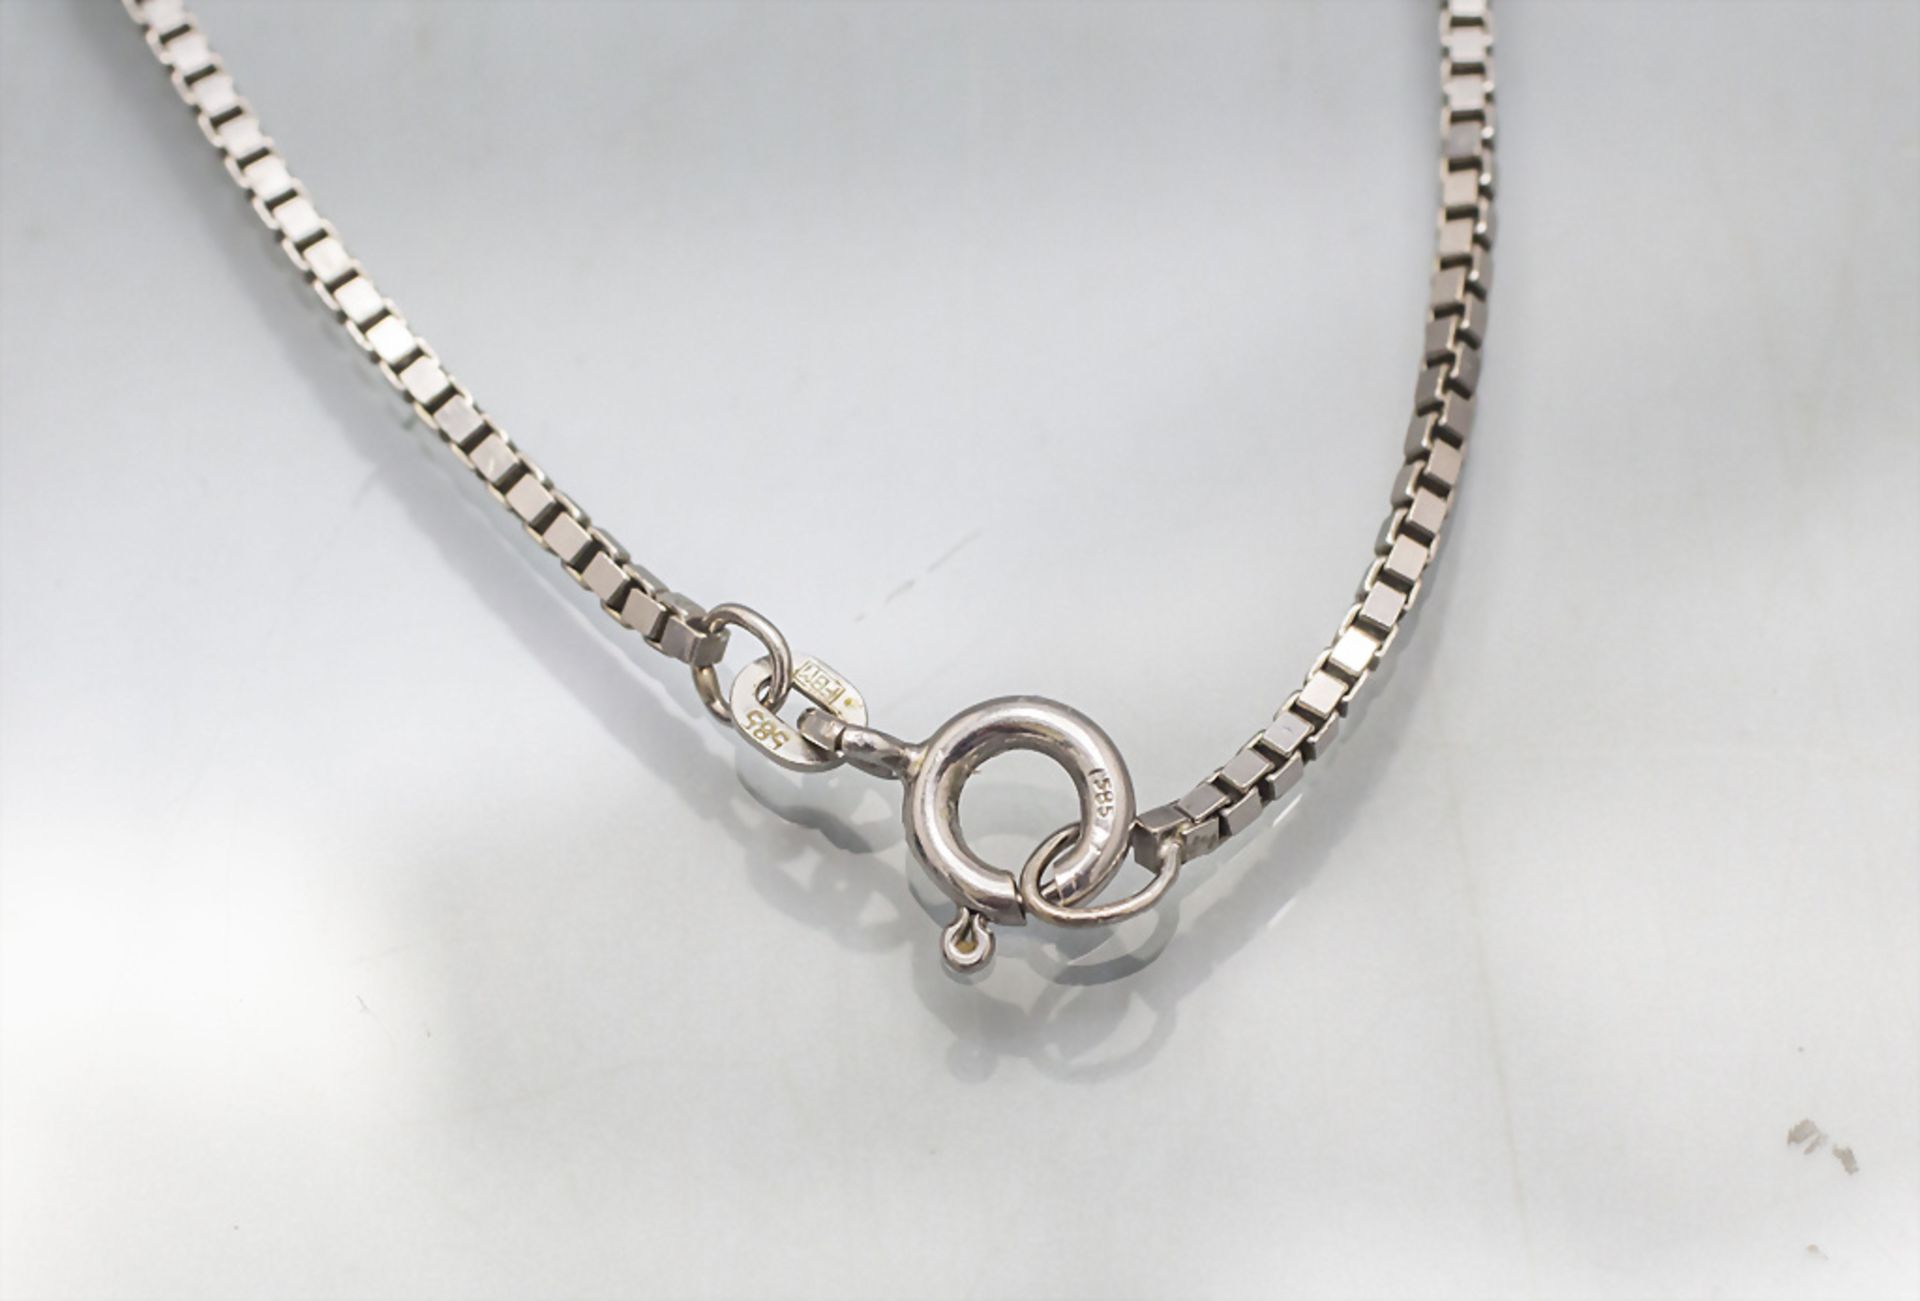 Weißgoldkette mit Perlenanhänger / A 14 ct white gold necklace with pearl pendant - Image 4 of 4